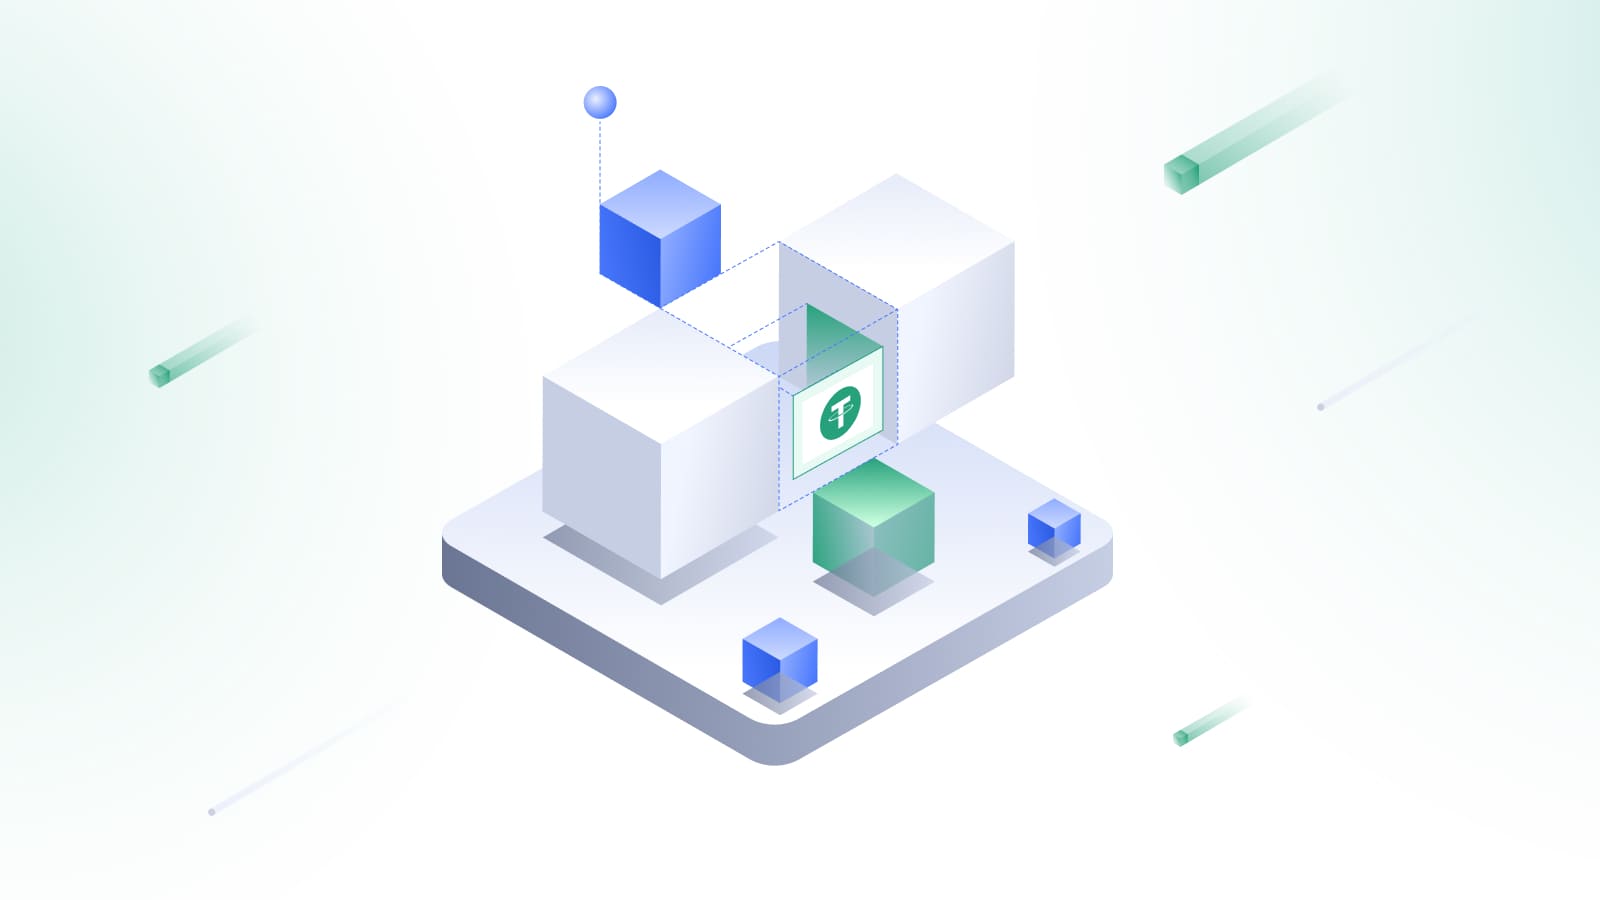 Tether (USDT) has expanded across various blockchains, including Bitcoin, Ethereum, Tron, and Binance.